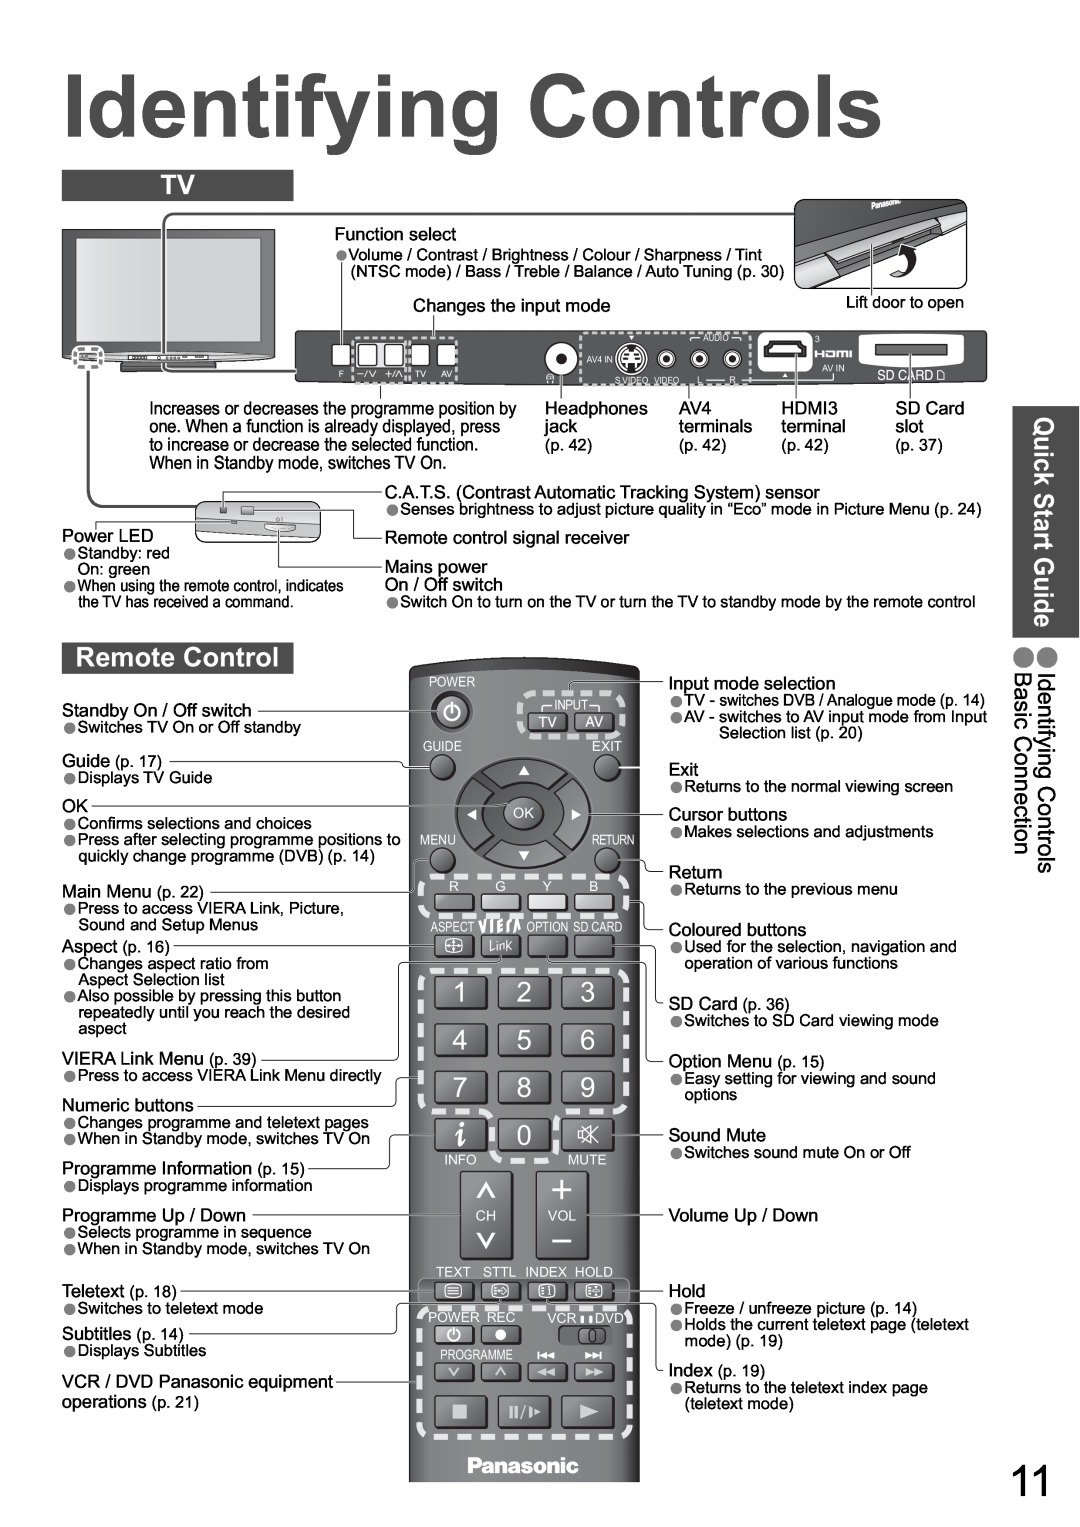 Panasonic TH-50PZ800A warranty Remote Control, Quick Start Guide, Identifying Controls Basic Connection, Option Menu p 